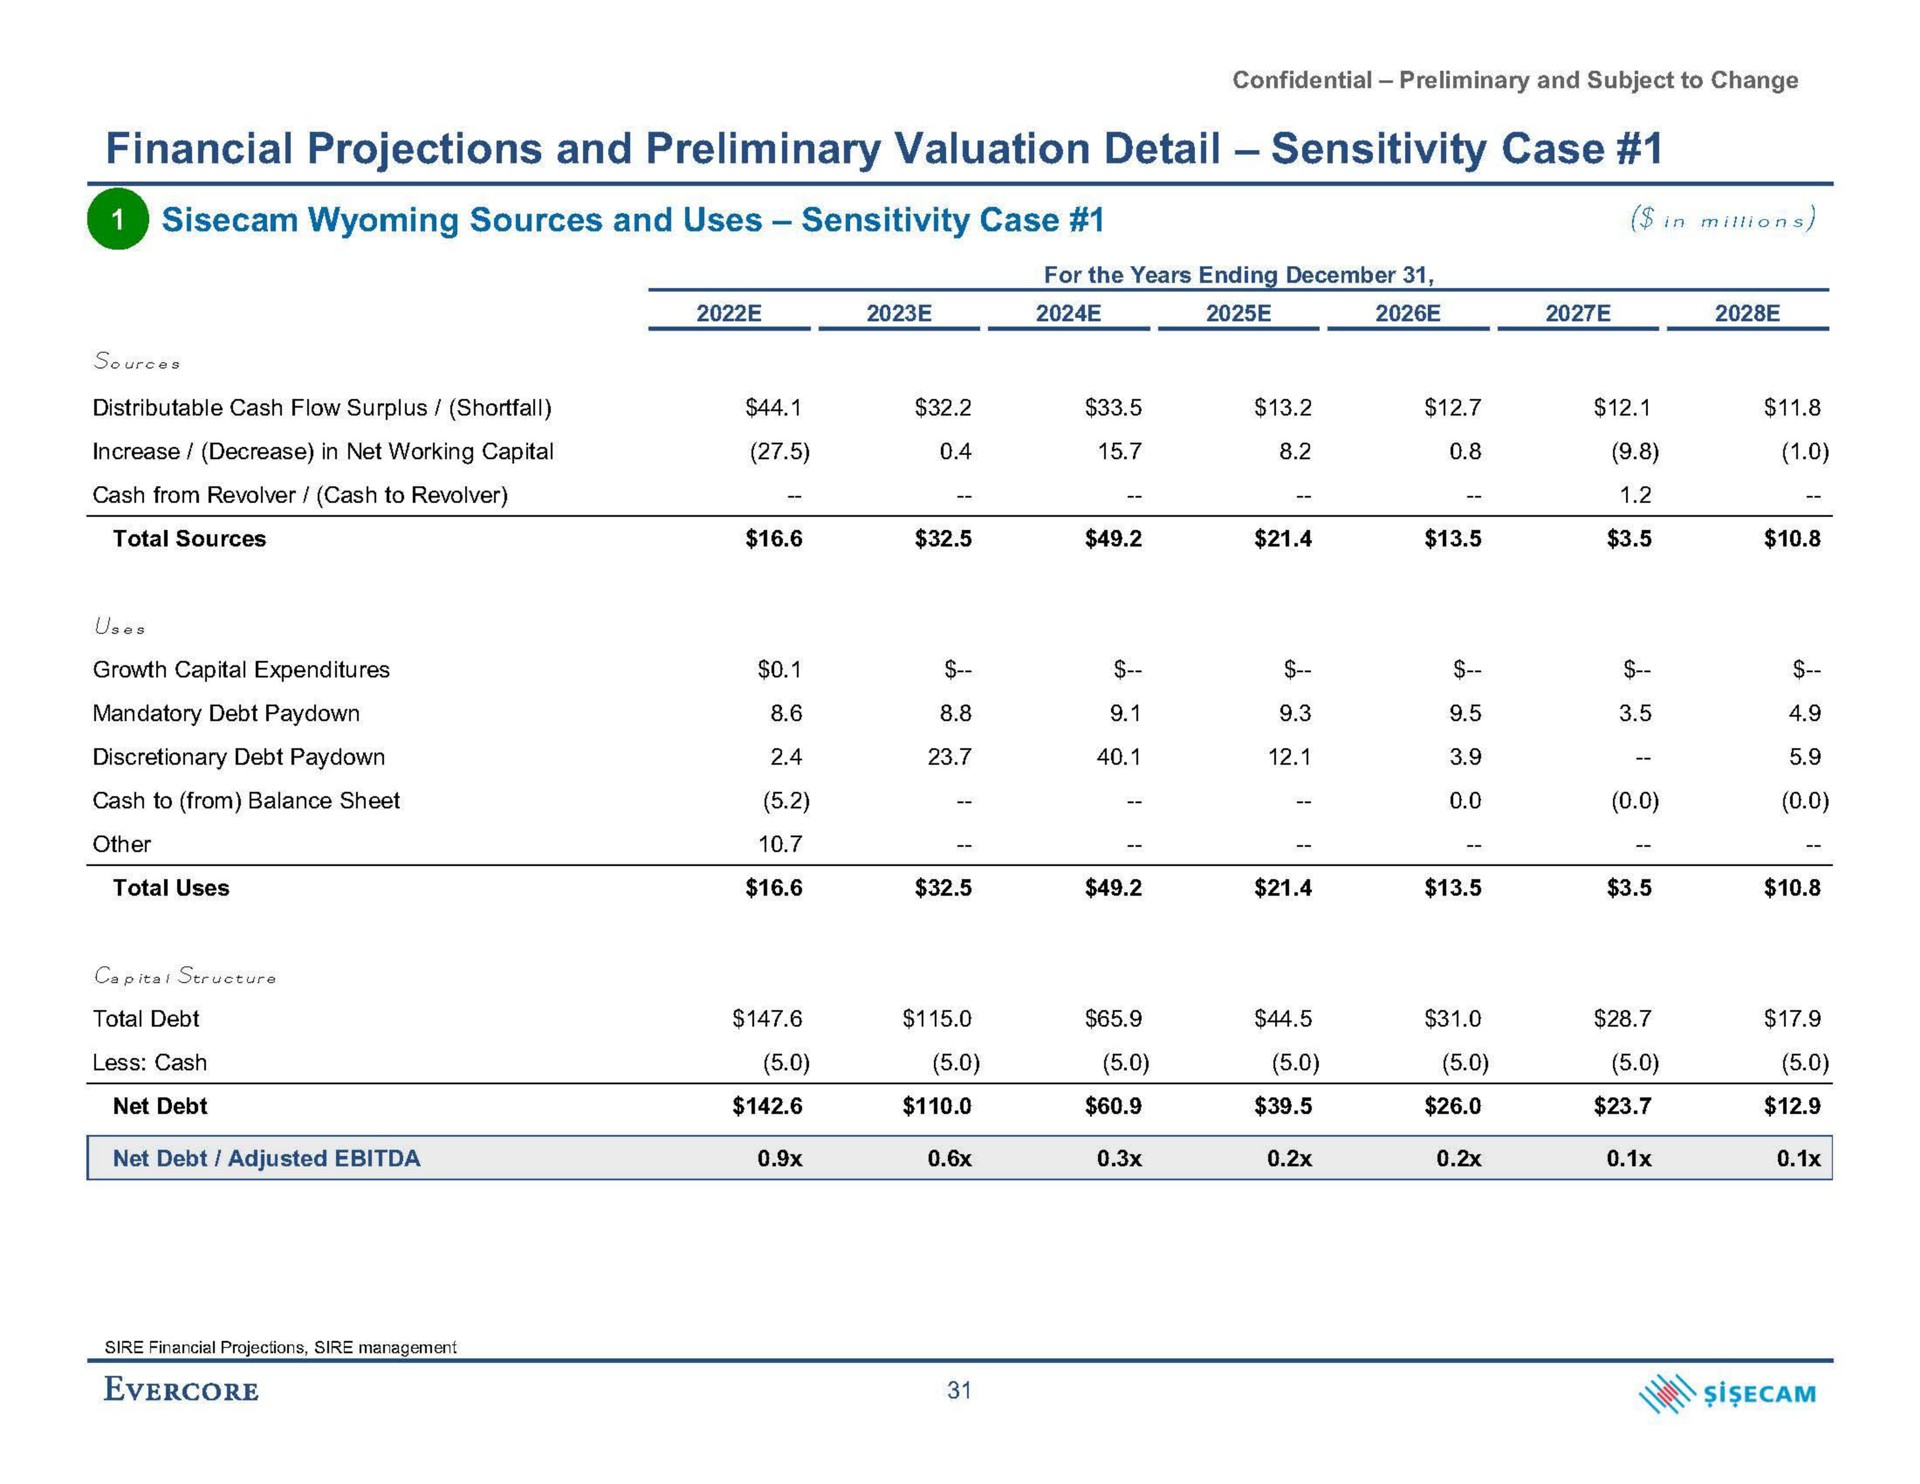 financial projections and preliminary valuation detail sensitivity case a sources and uses sensitivity case | Evercore